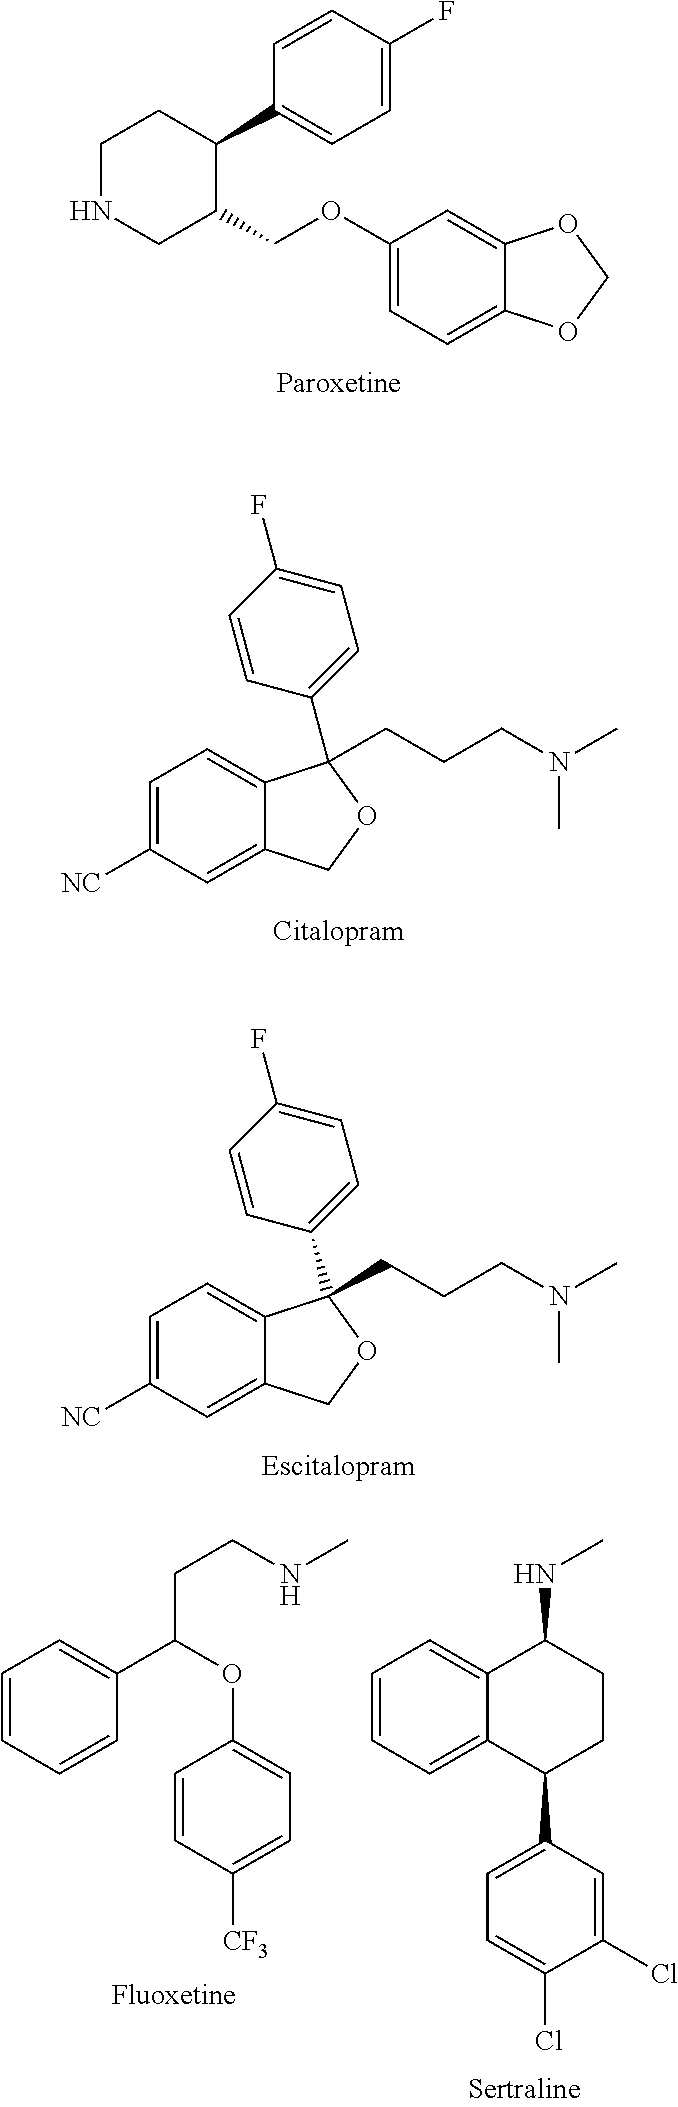 Substituted phenylpiperidines with serotoninergic activity and enhanced therapeutic properties